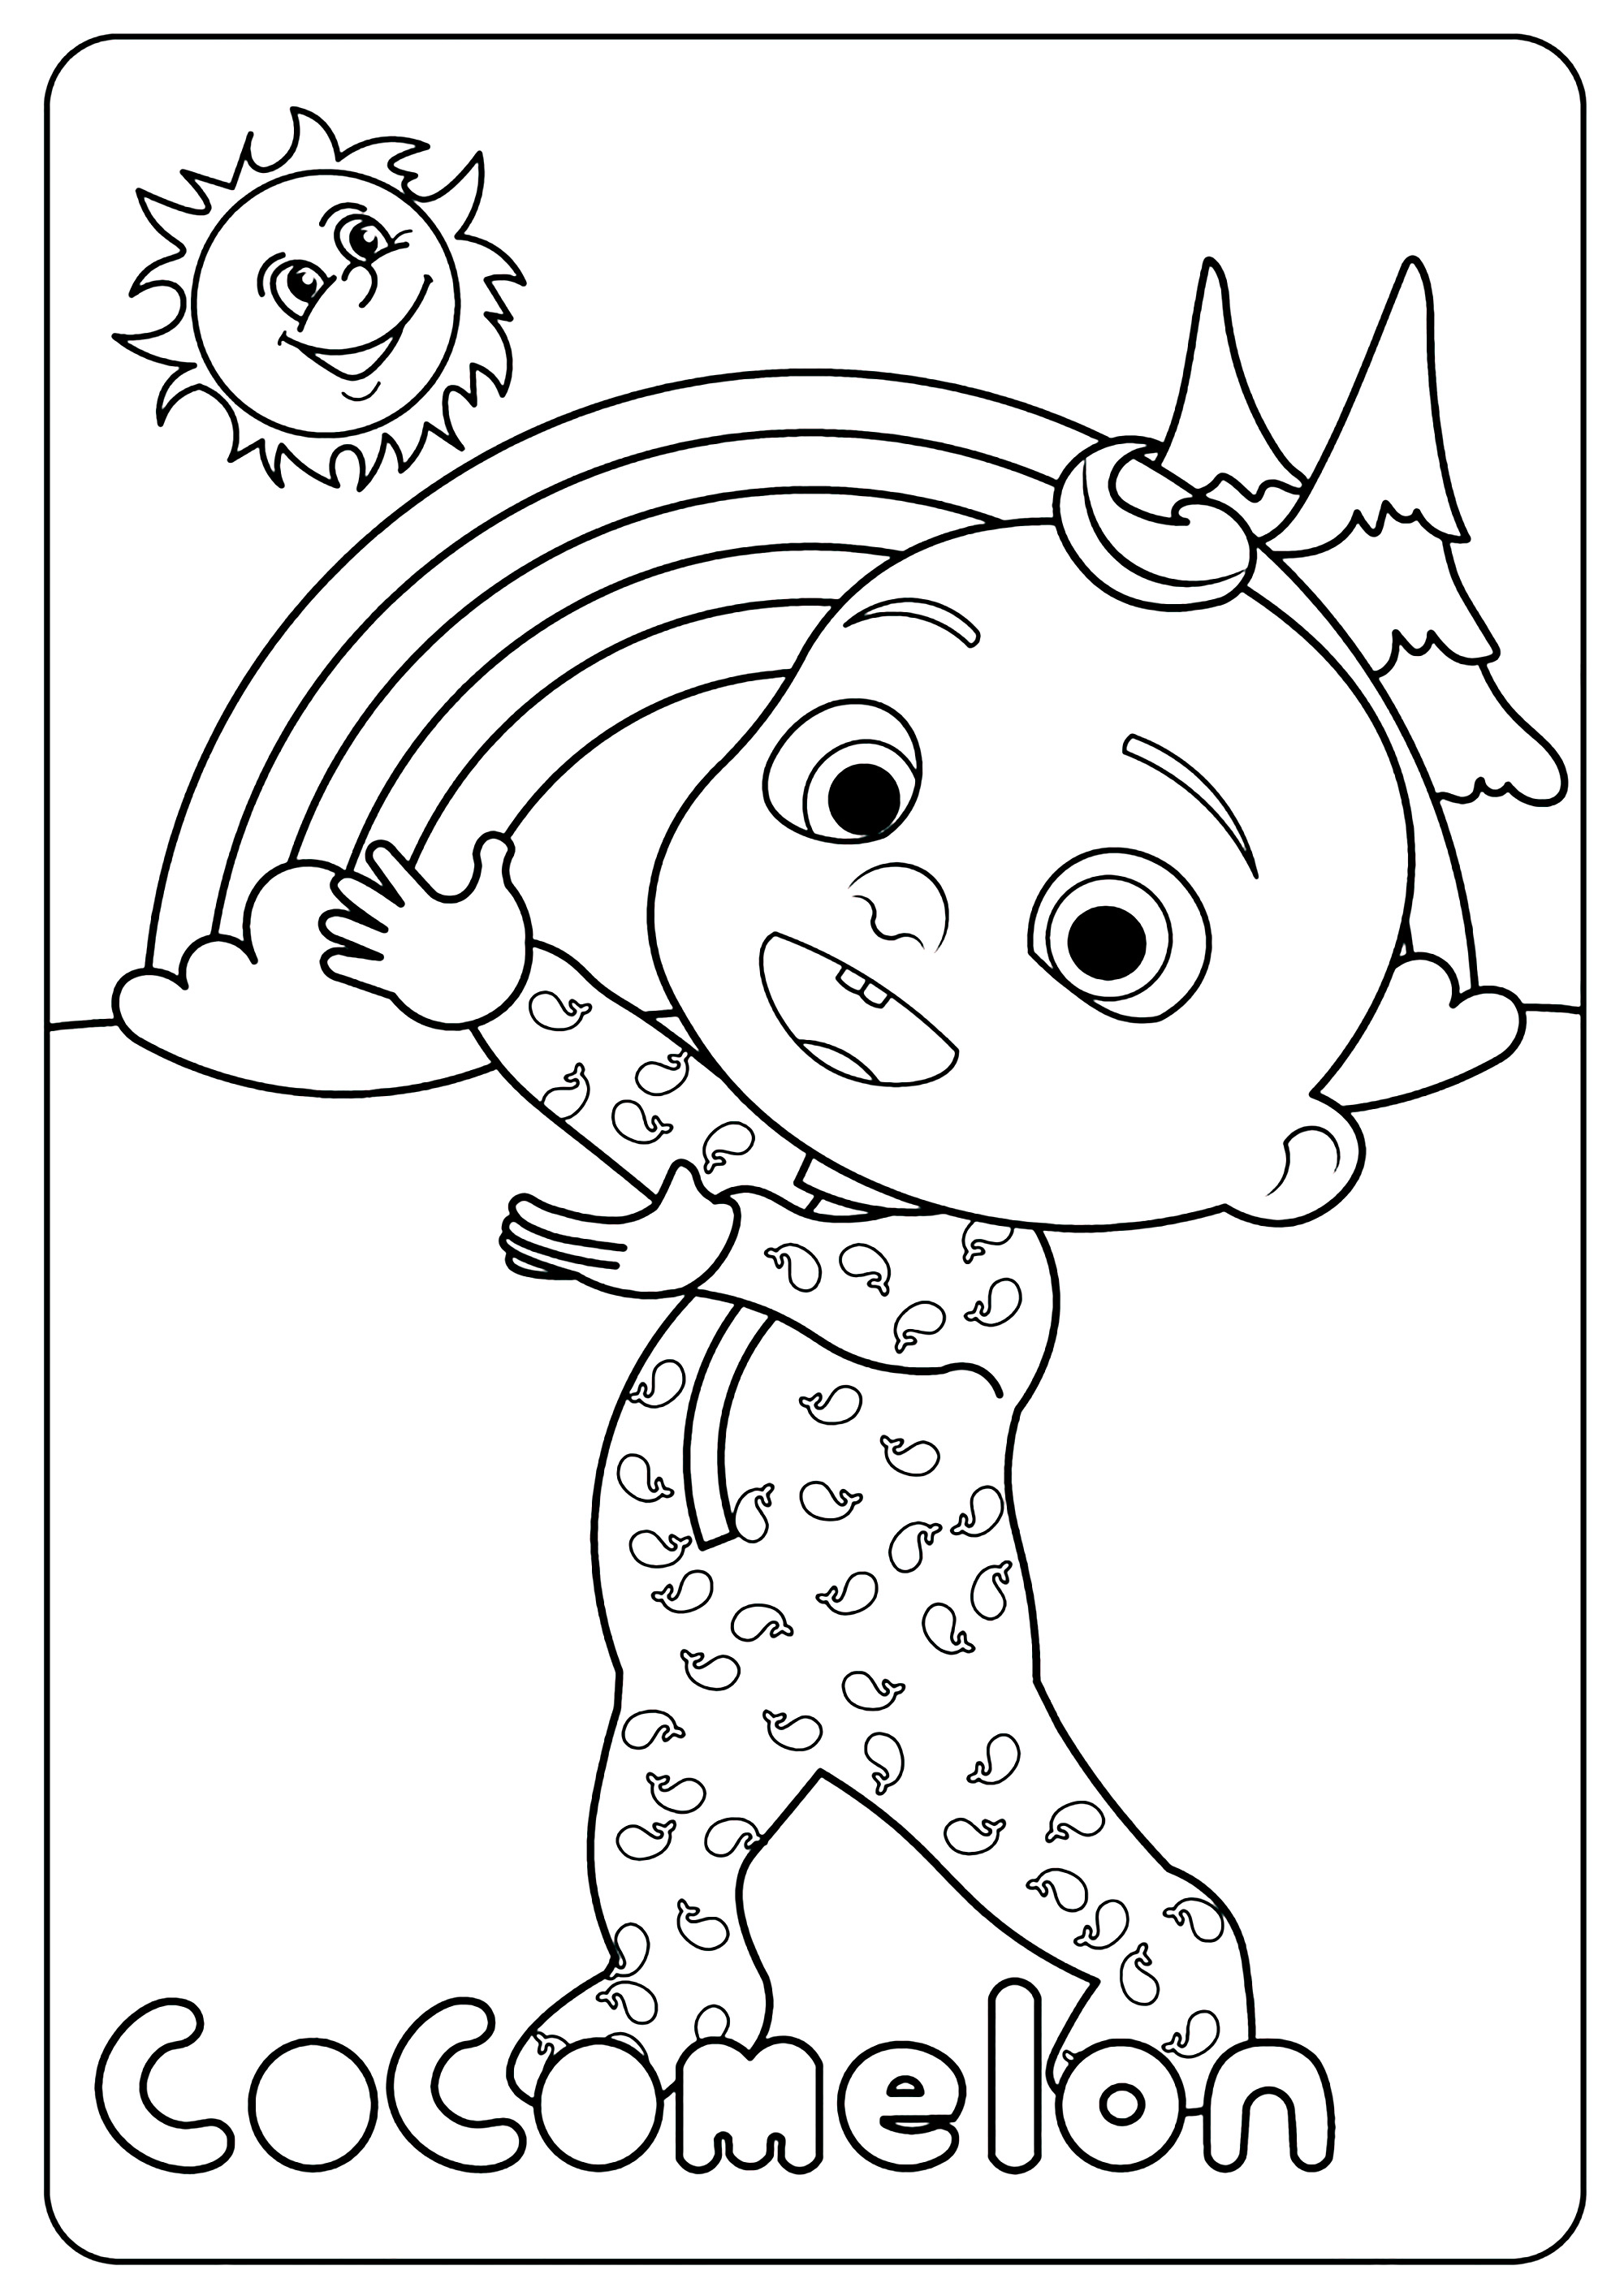 JJ the Cocomelon baby - Cocomelon Kids Coloring Pages